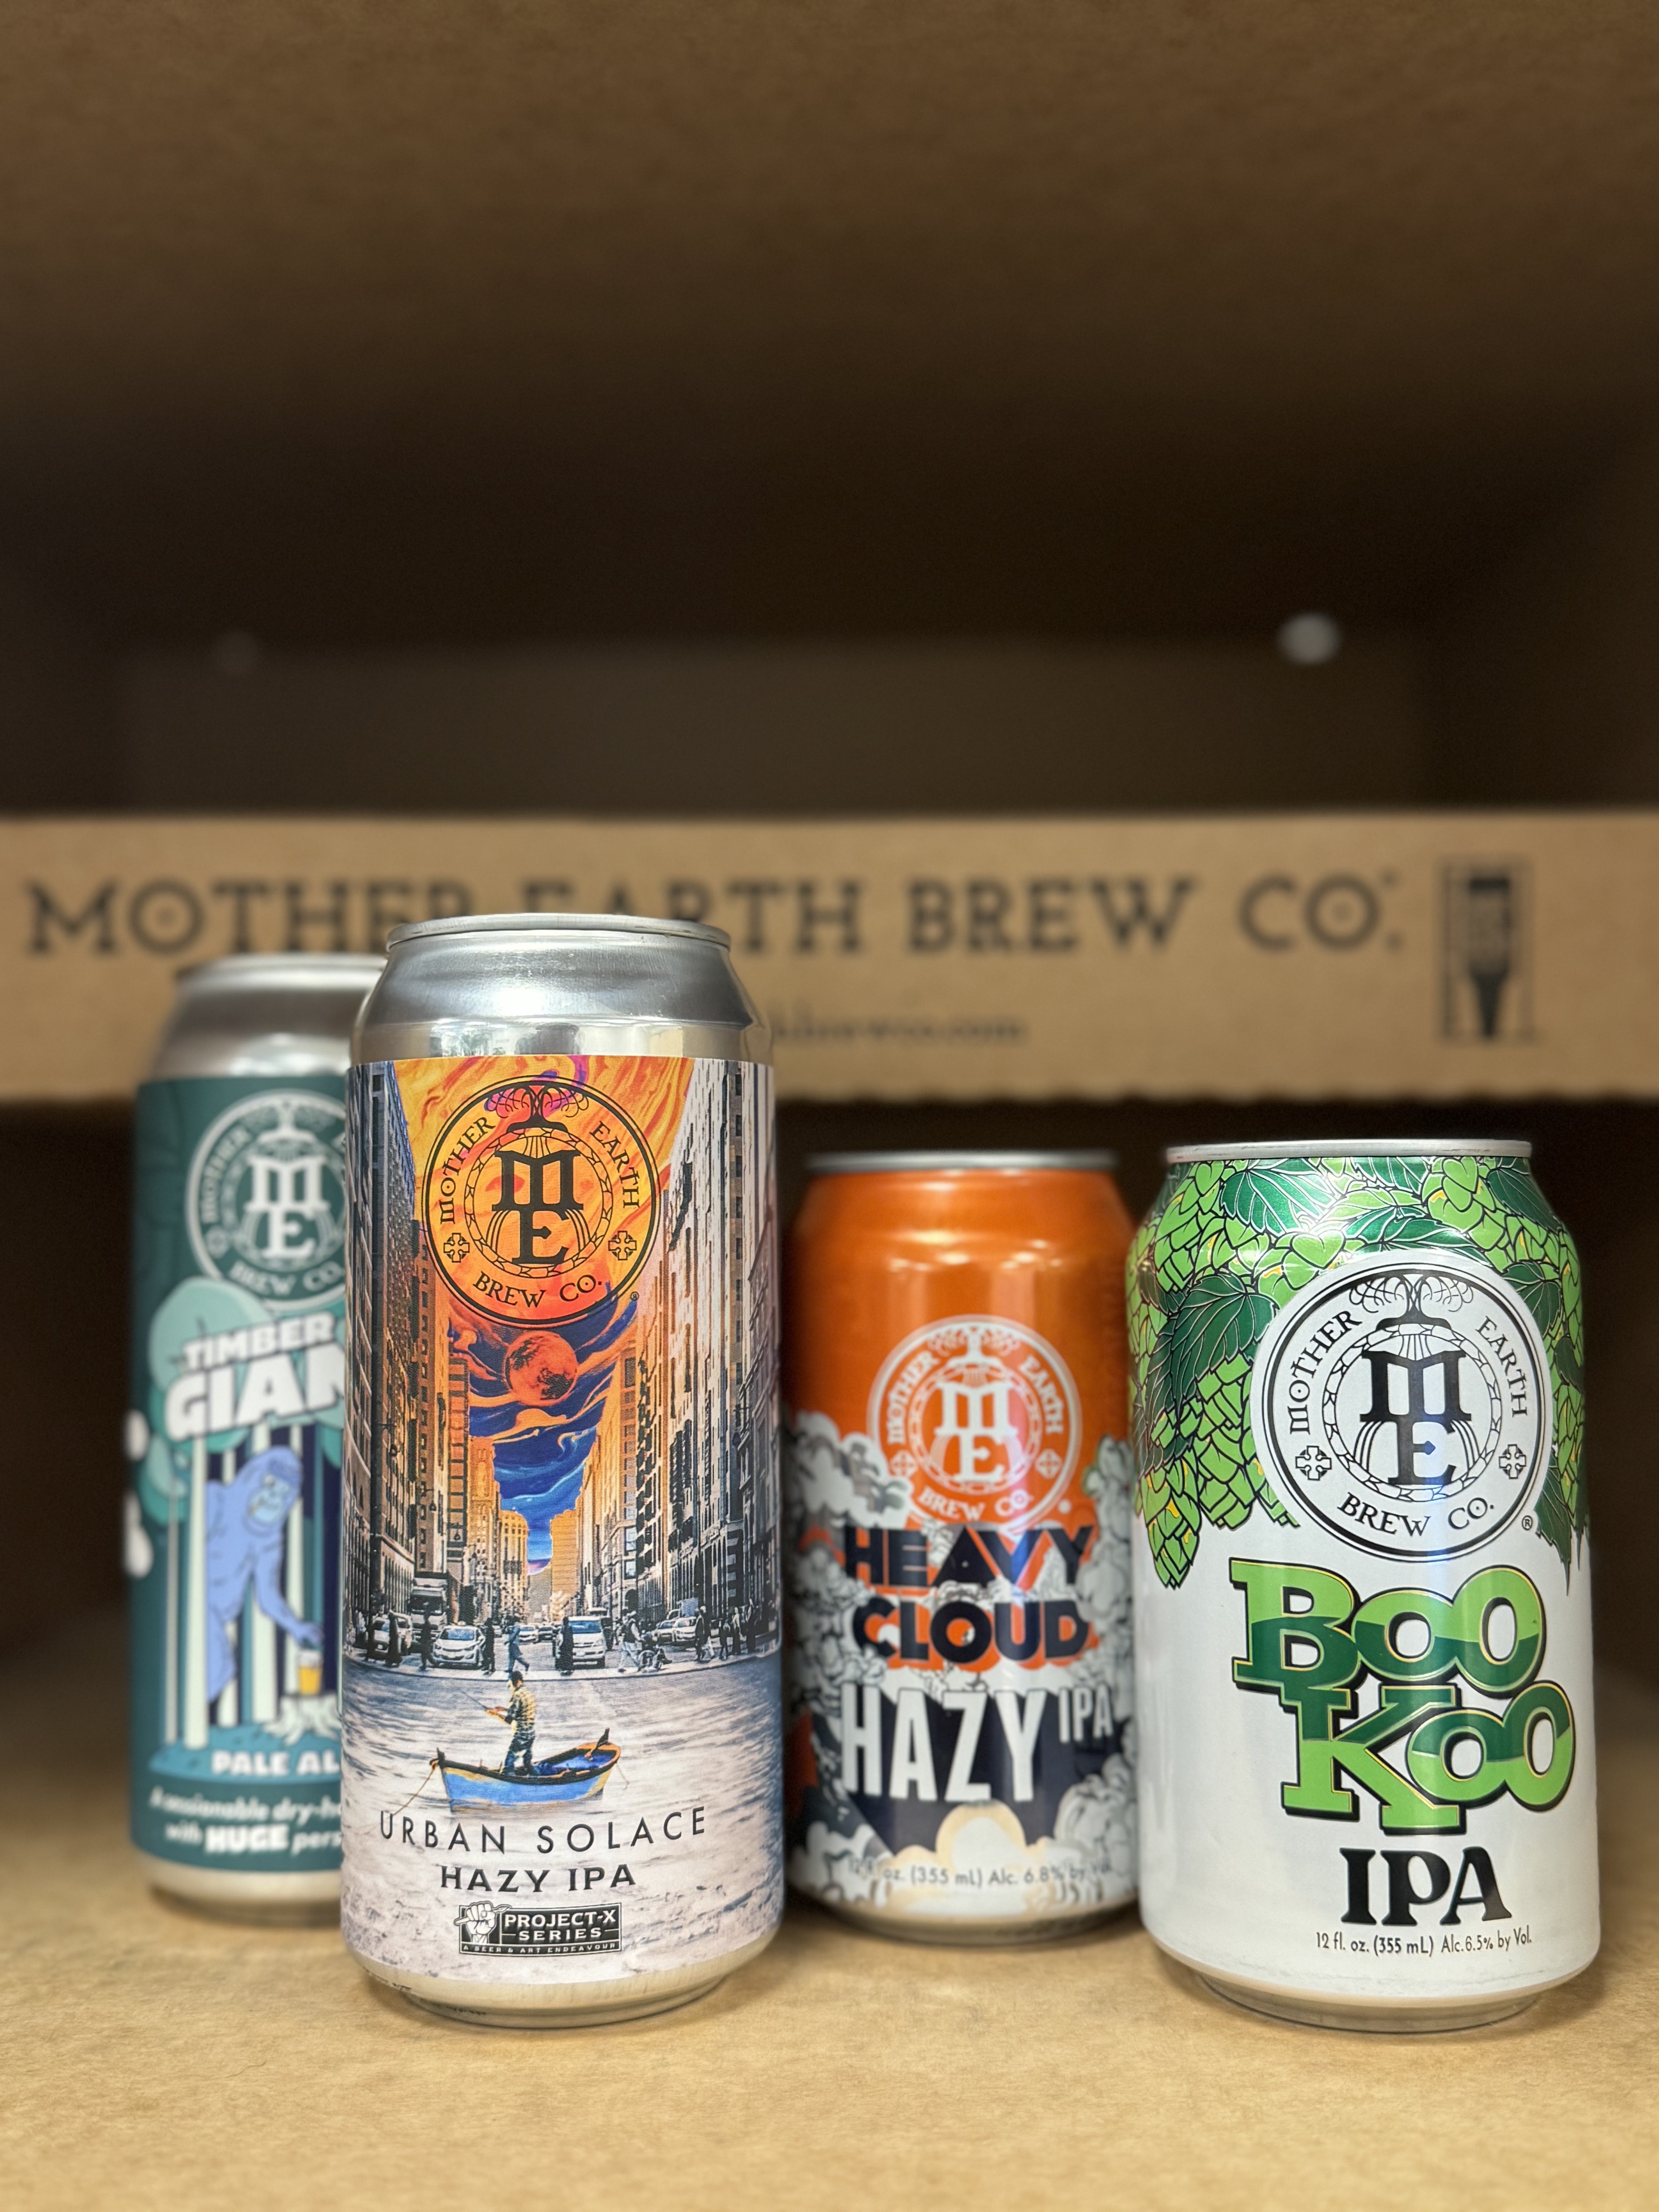 -Mother Earth- Mother Earth 🚀 Take Off Set 1-Packs & Cases- Only @ Beer Republic - The best online beer store for American & Canadian craft beer - Buy beer online from the USA and Canada - Bier online kopen - Amerikaans bier kopen - Craft beer store - Craft beer kopen - Amerikanisch bier kaufen - Bier online kaufen - Acheter biere online - IPA - Stout - Porter - New England IPA - Hazy IPA - Imperial Stout - Barrel Aged - Barrel Aged Imperial Stout - Brown - Dark beer - Blond - Blonde - Pilsner - Lager - Whe